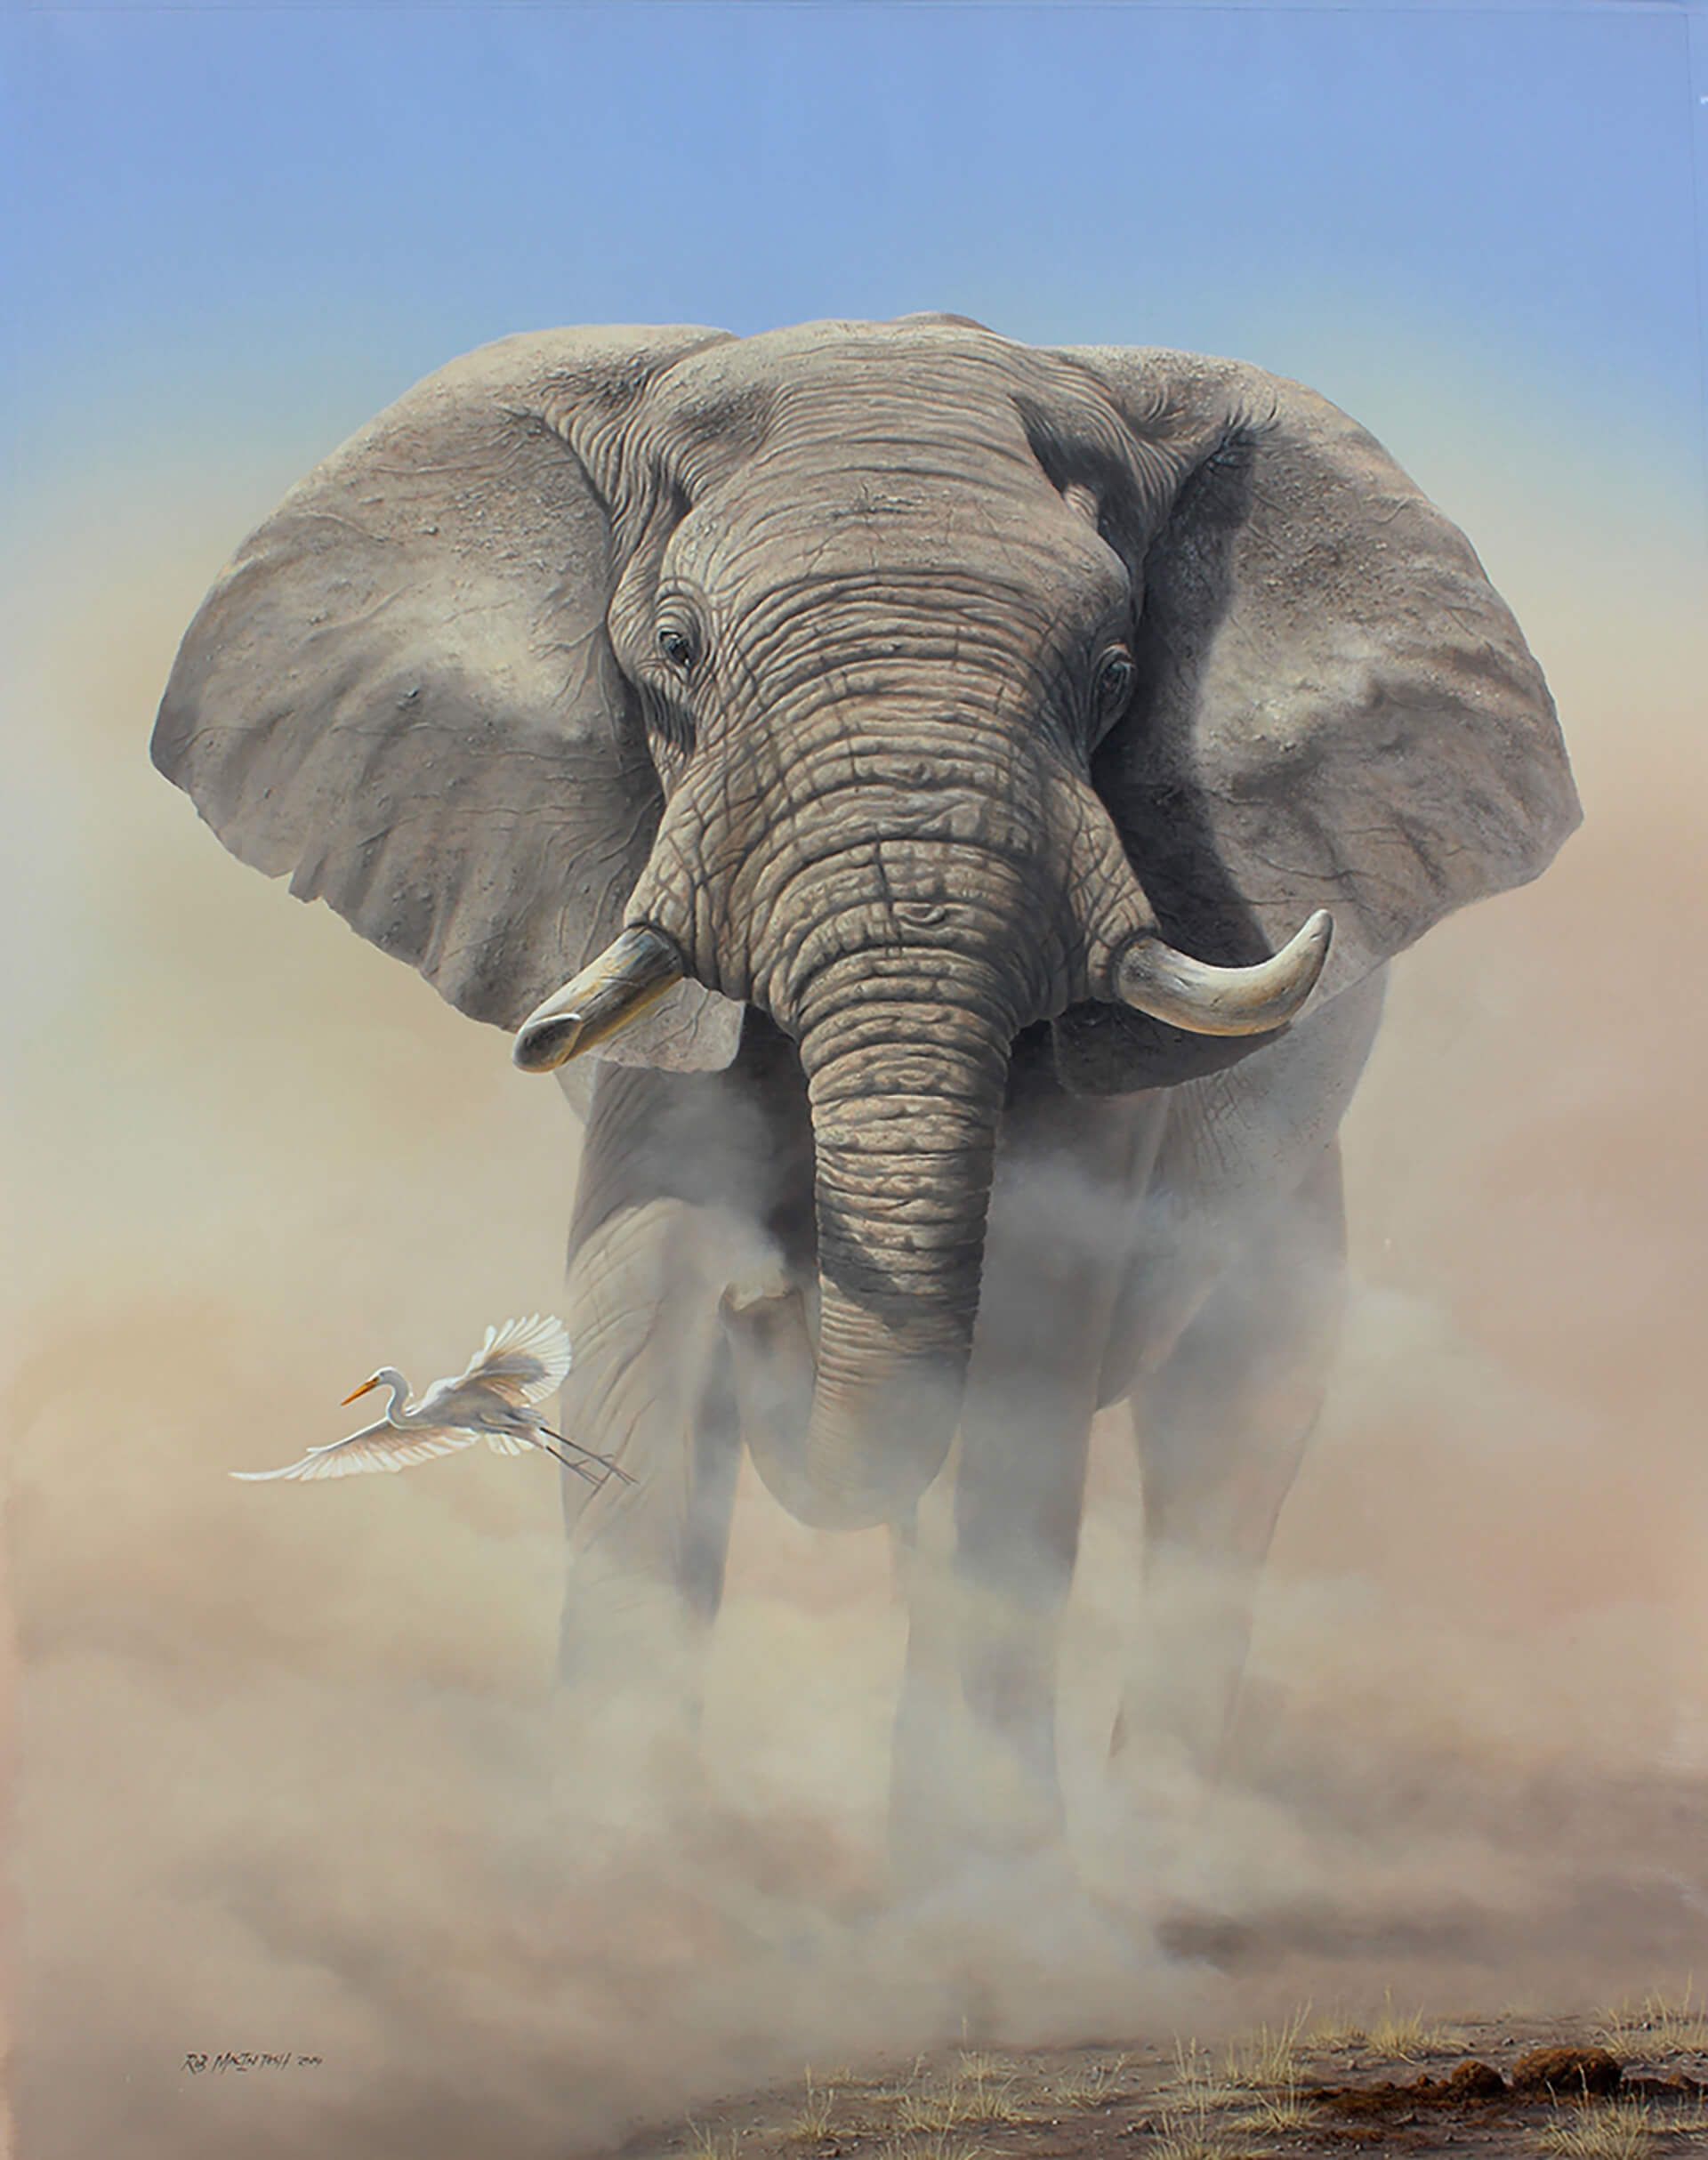 Photorealistic painting of an elephant bull surrounded by dust